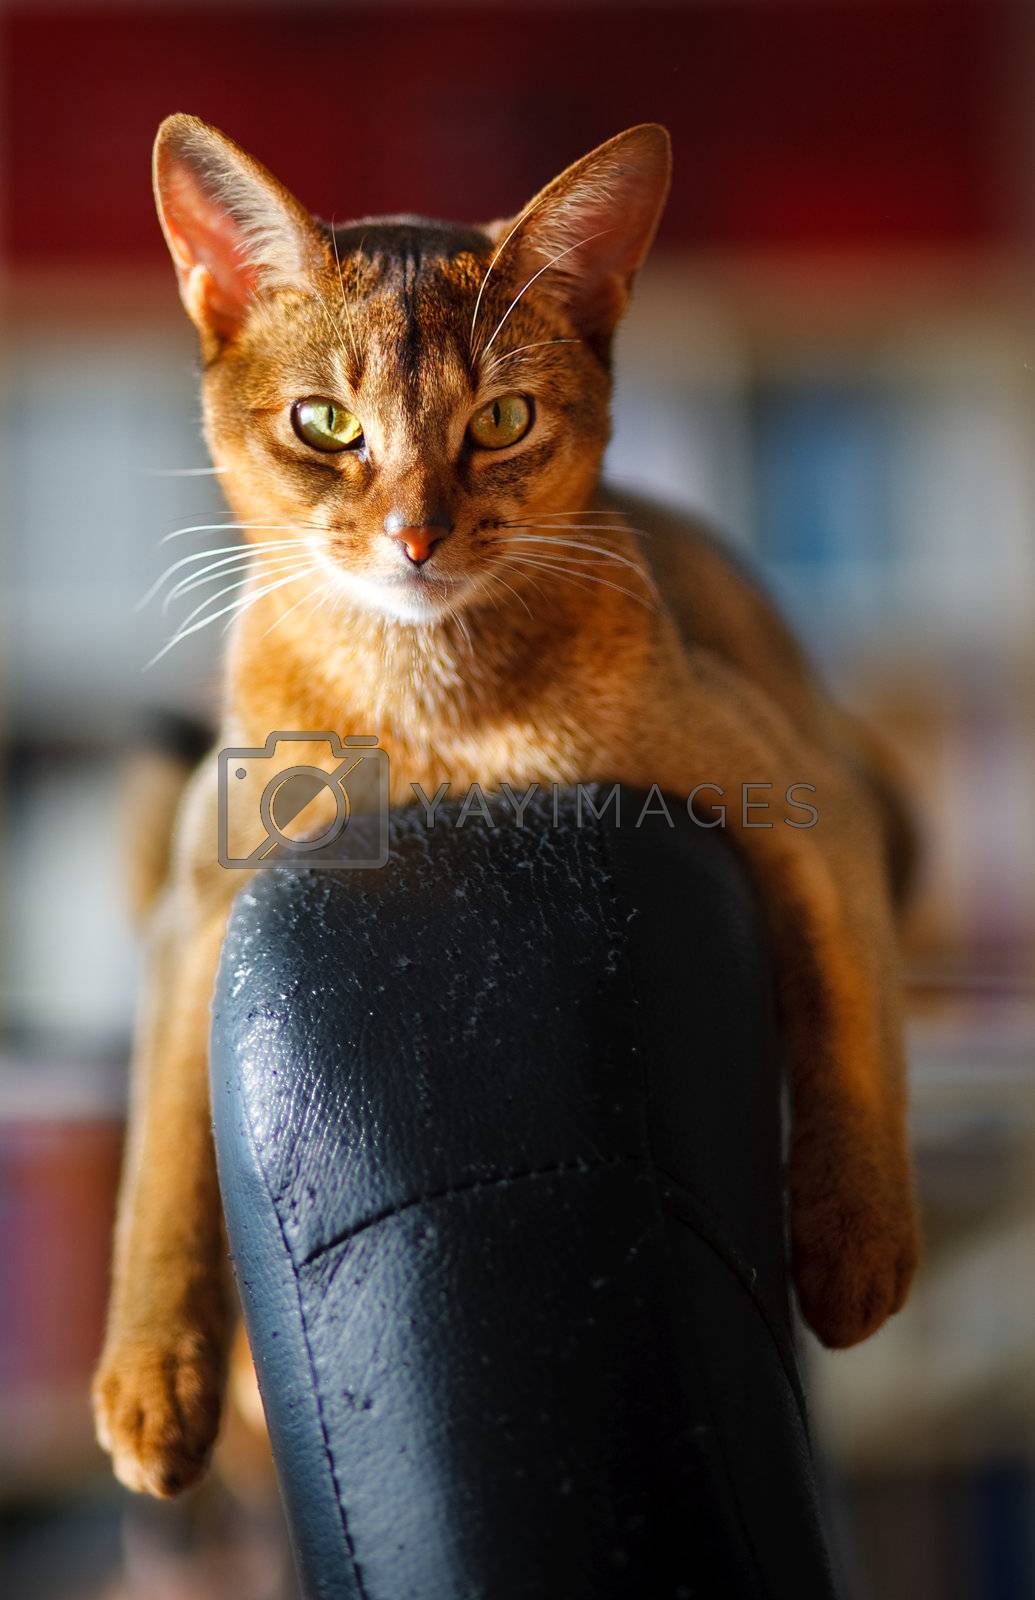 Royalty free image of Abyssinian cat by anobis